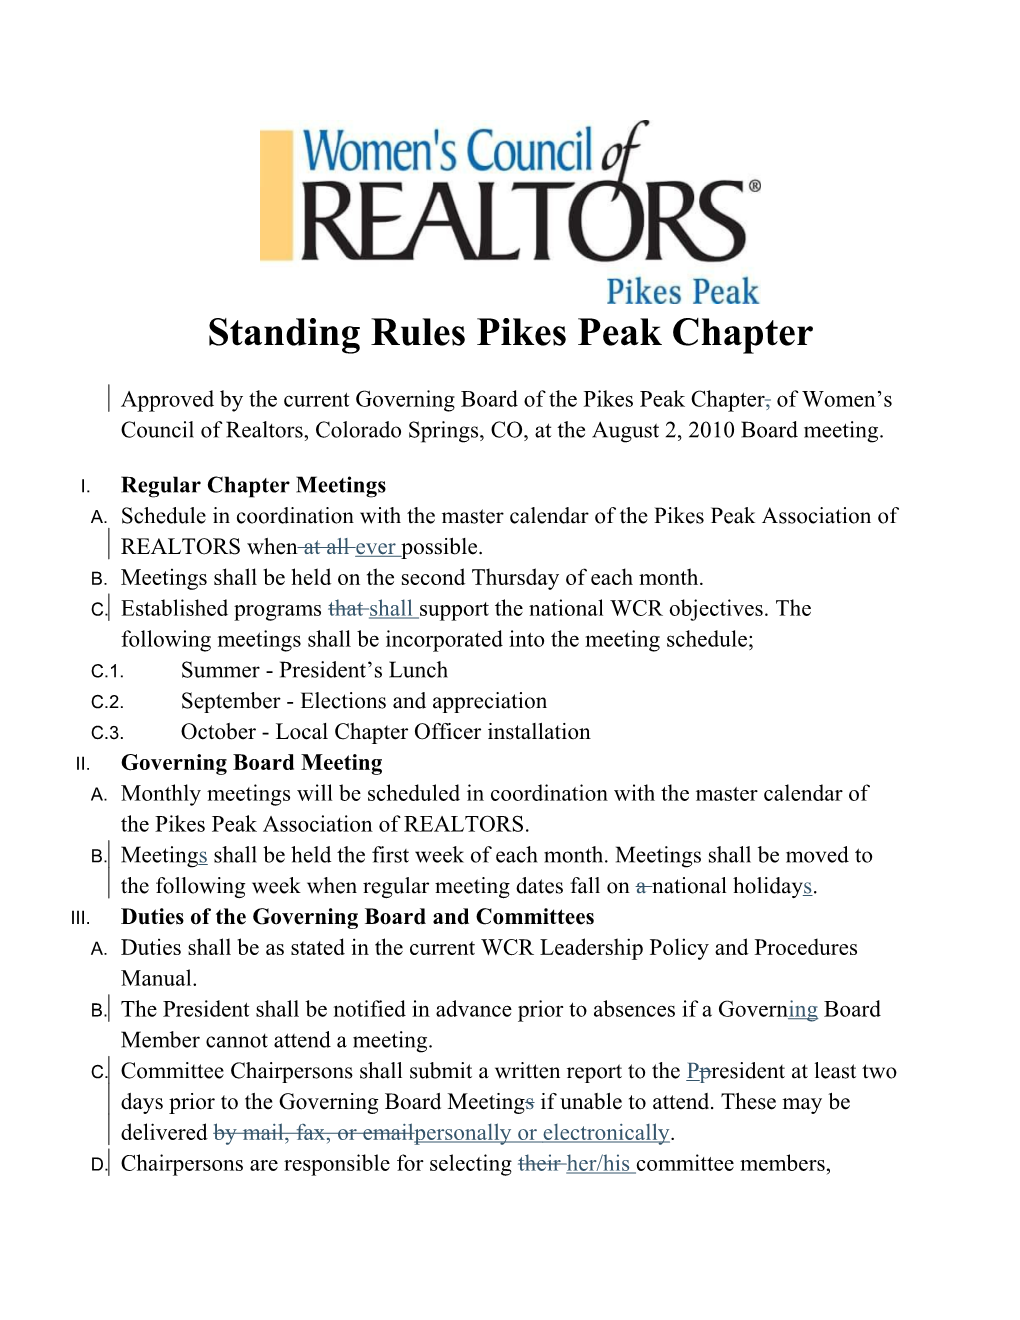 Standing Rules Pikes Peak Chapter